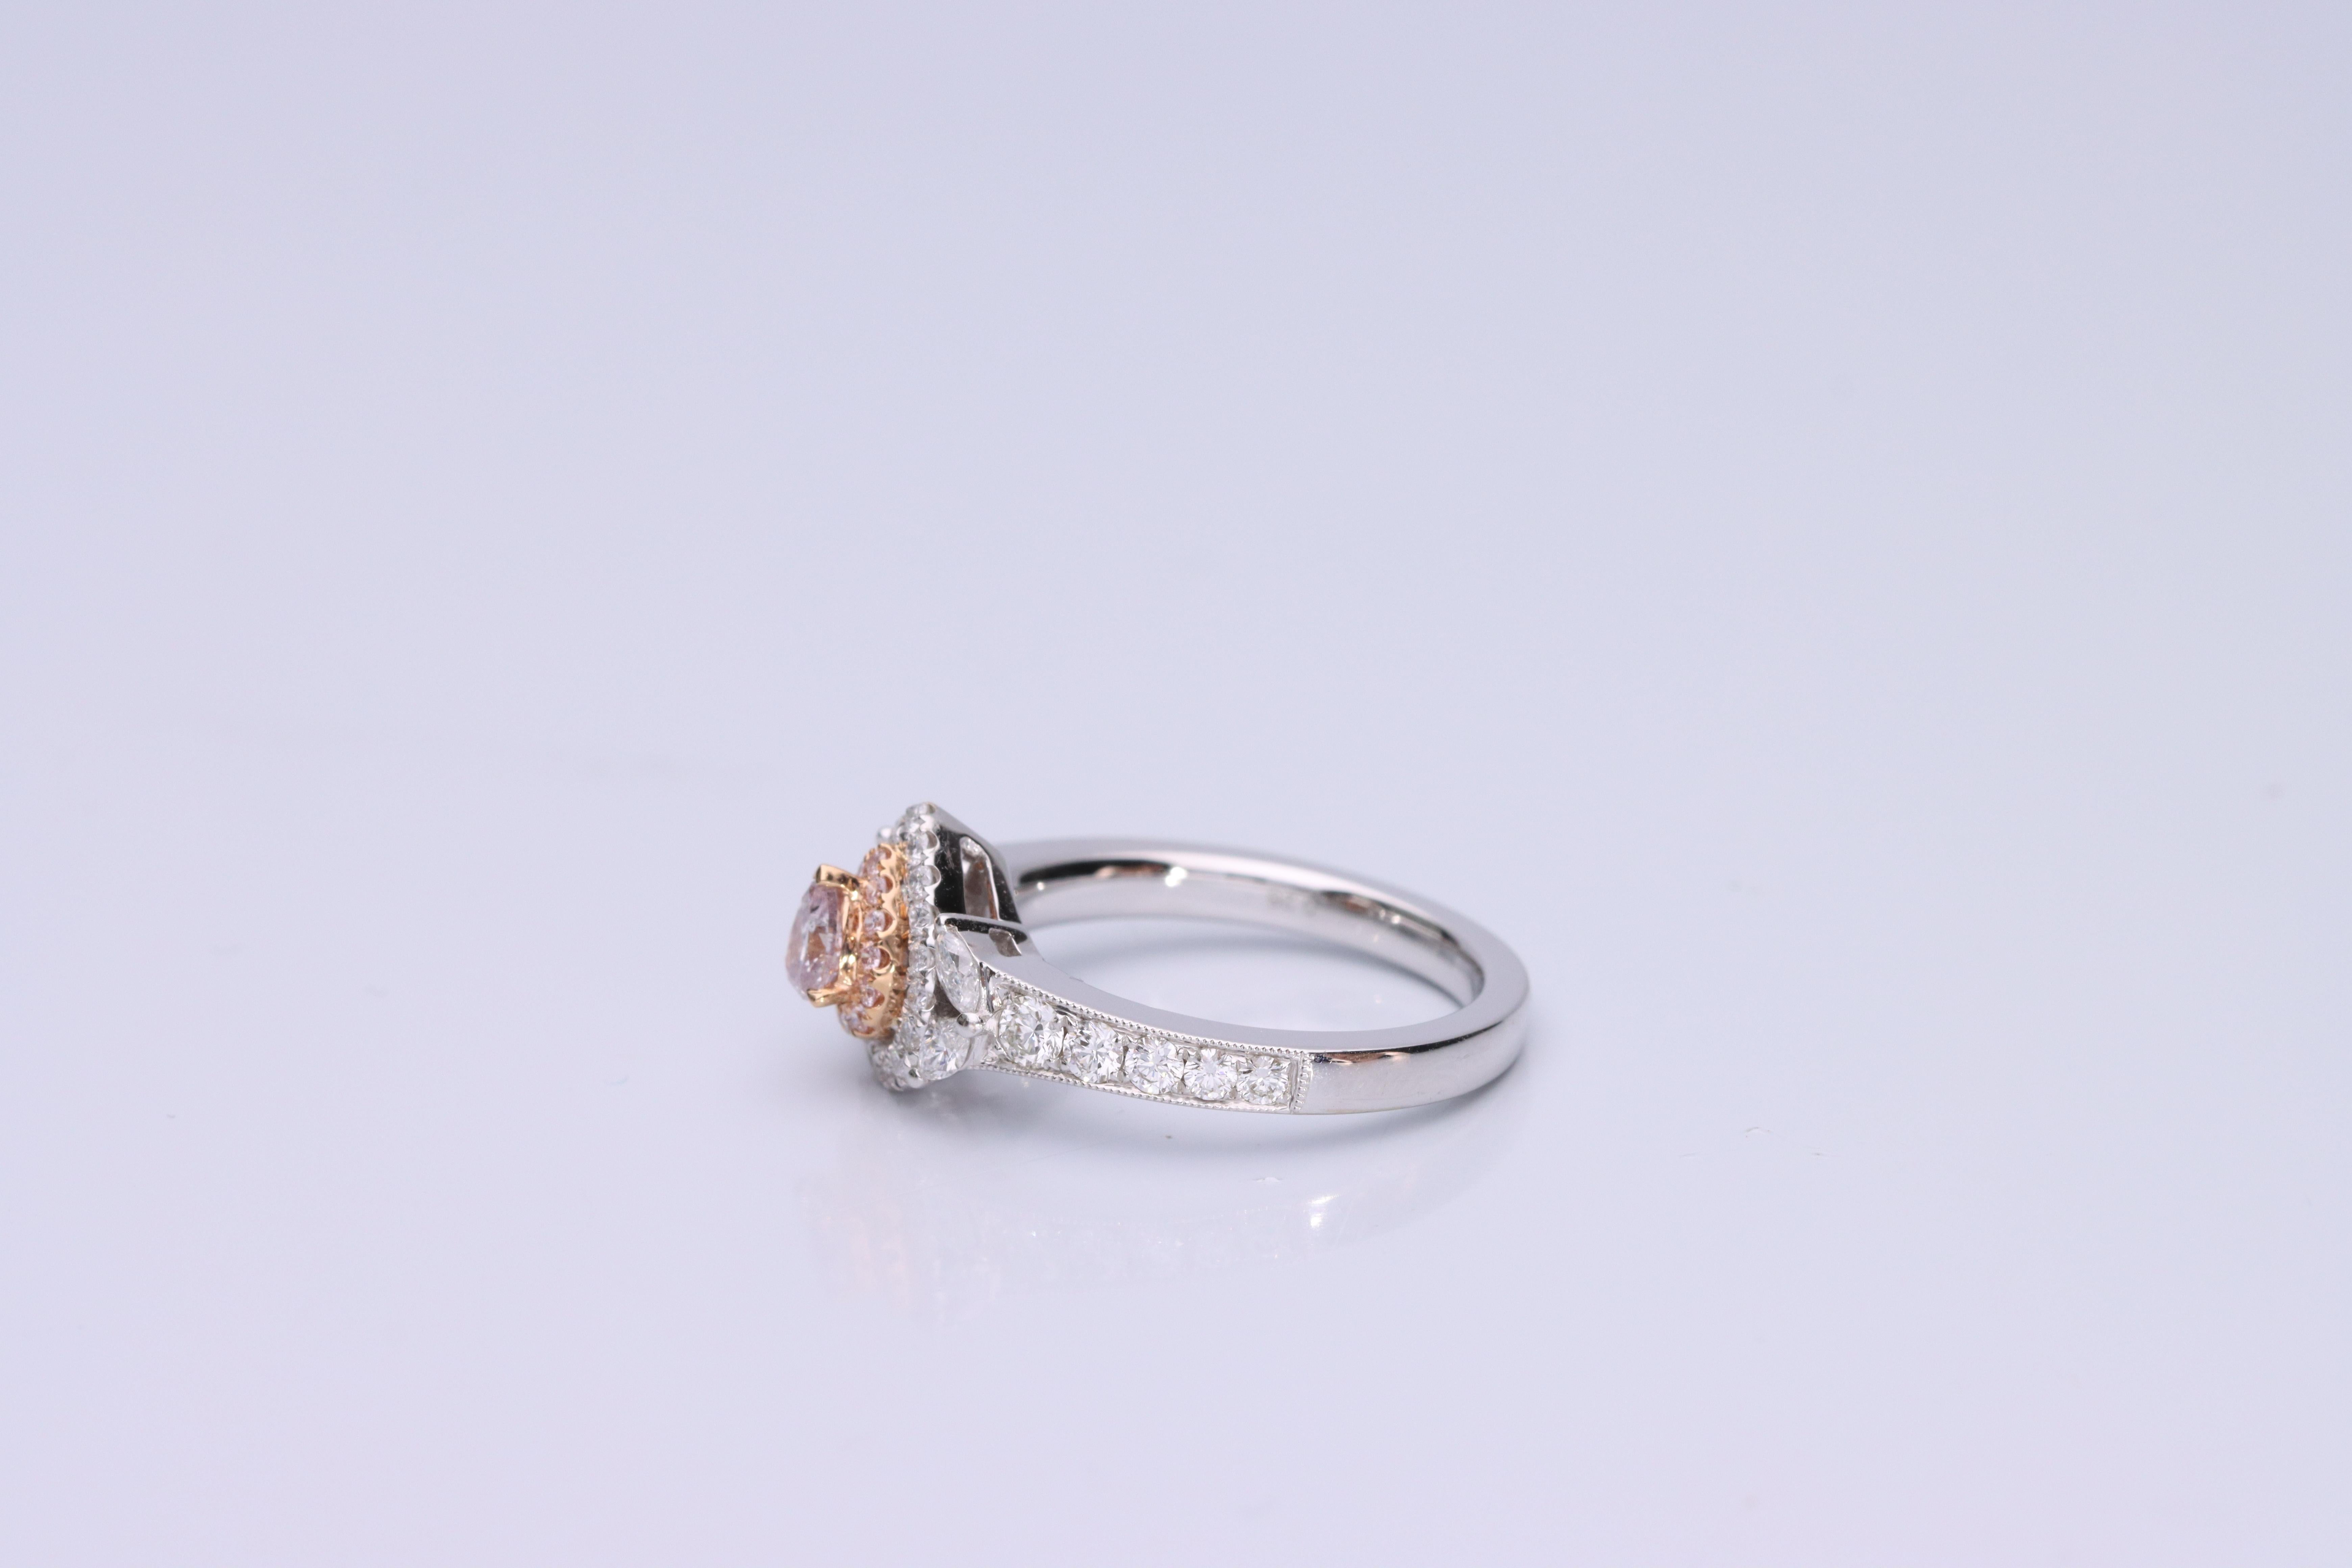 Stunning, timeless and classy eternity Unique Ring. Decorate yourself in luxury with this Gin & Grace Ring. The 18K Two Tone Gold jewelry boasts with Pear-cut 1 pcs  0.20 carat, Round-cut 13 pcs 0.07 carat Pink Diamond and Natural Round-cut white